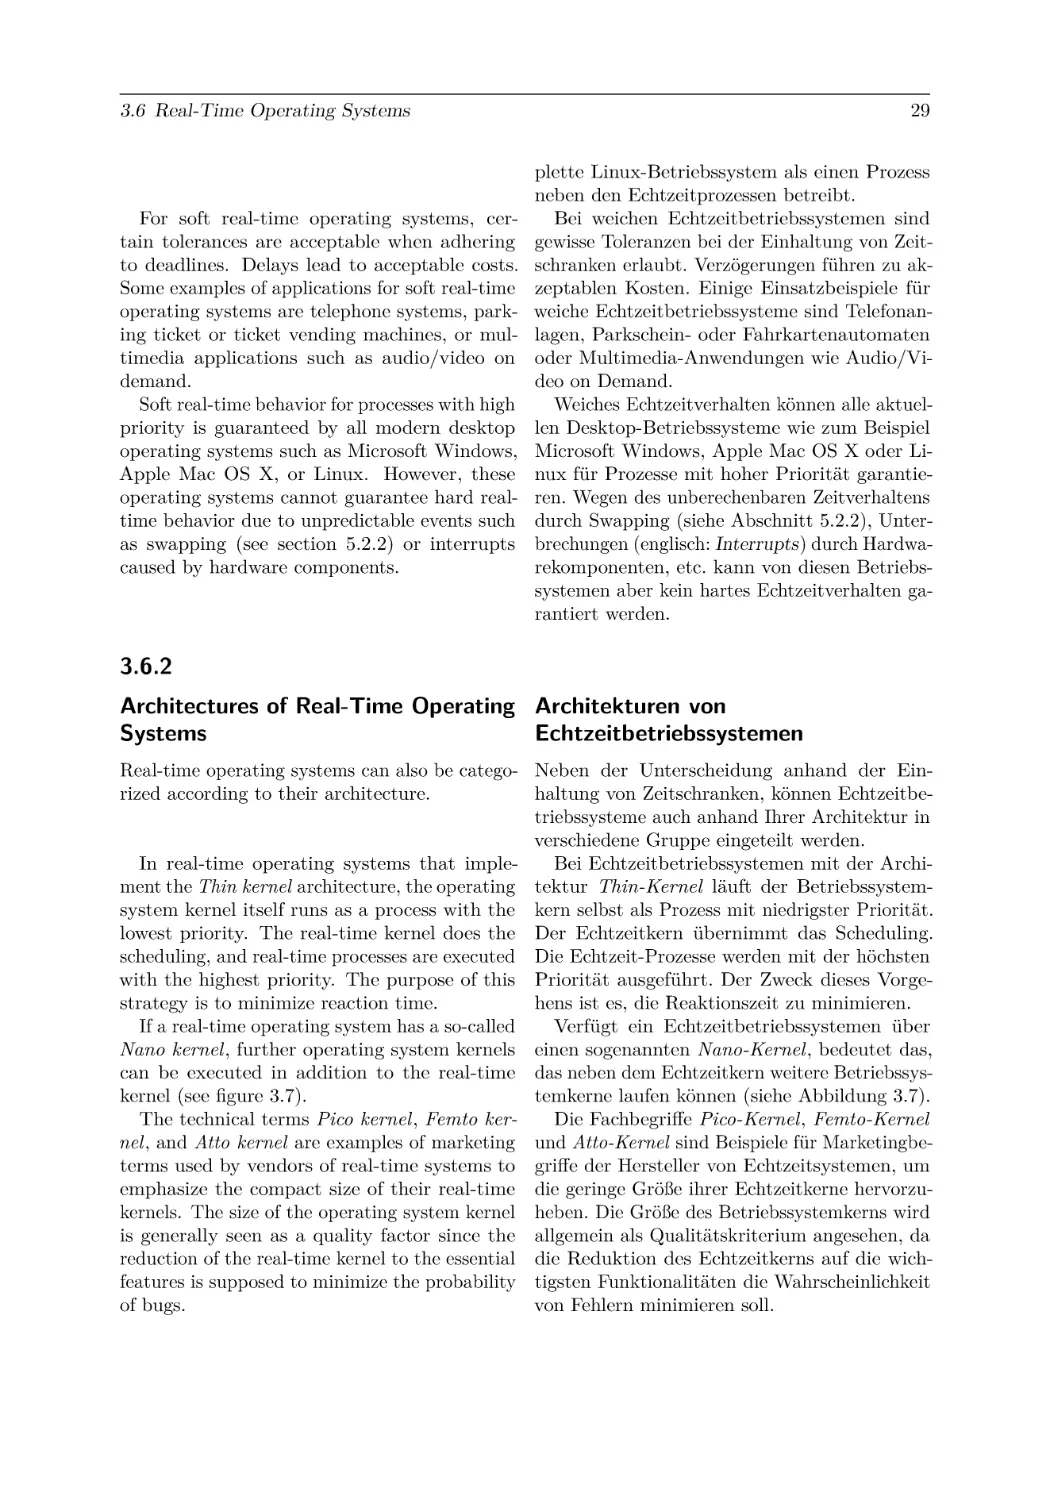 3.6.2
Architectures of Real-Time Operating Systems